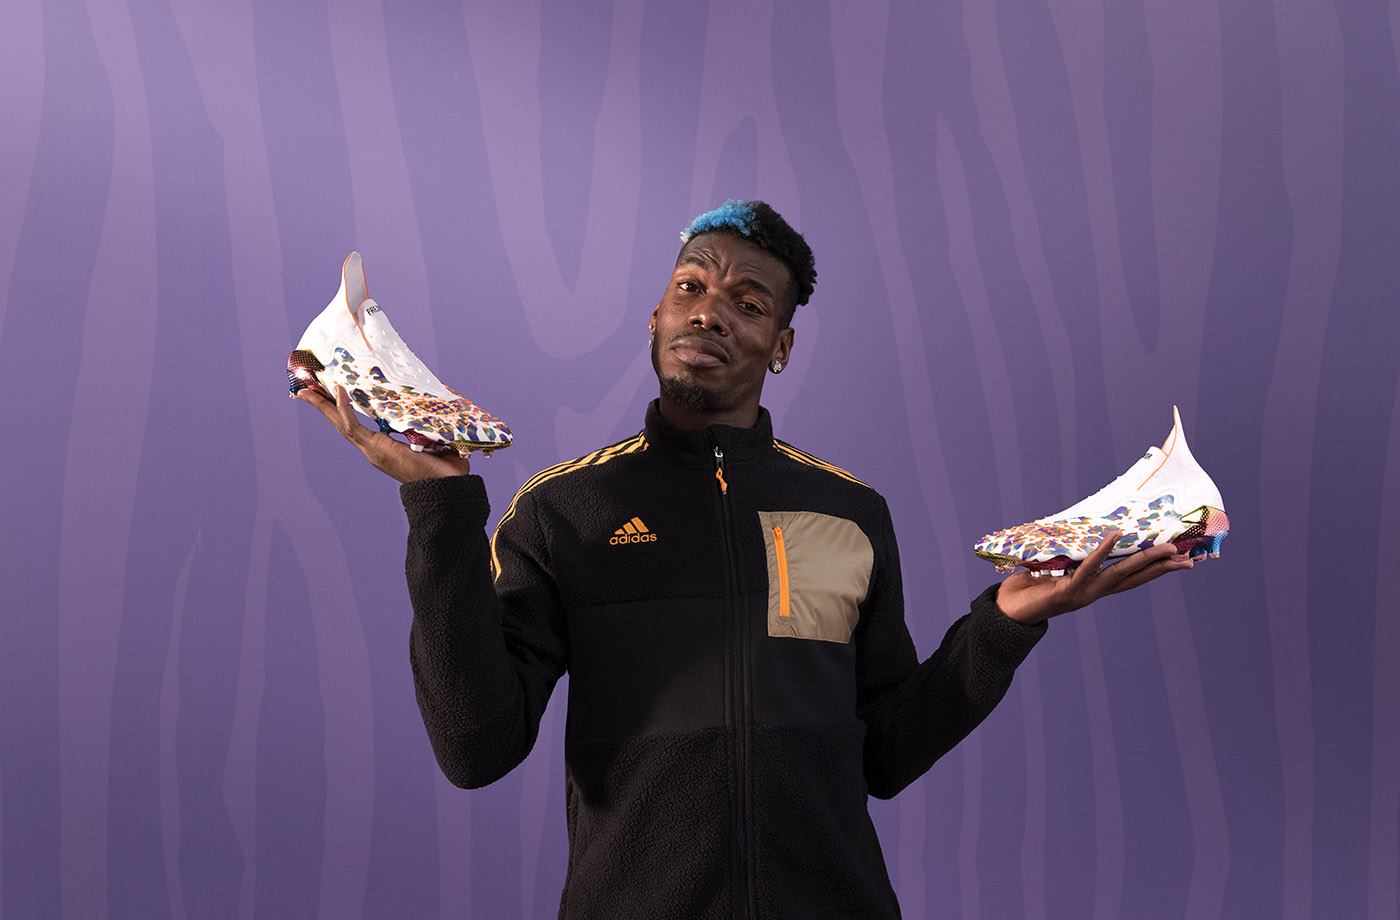 Paul Pogba Steps Out In Signature Season 5 adidas Collection